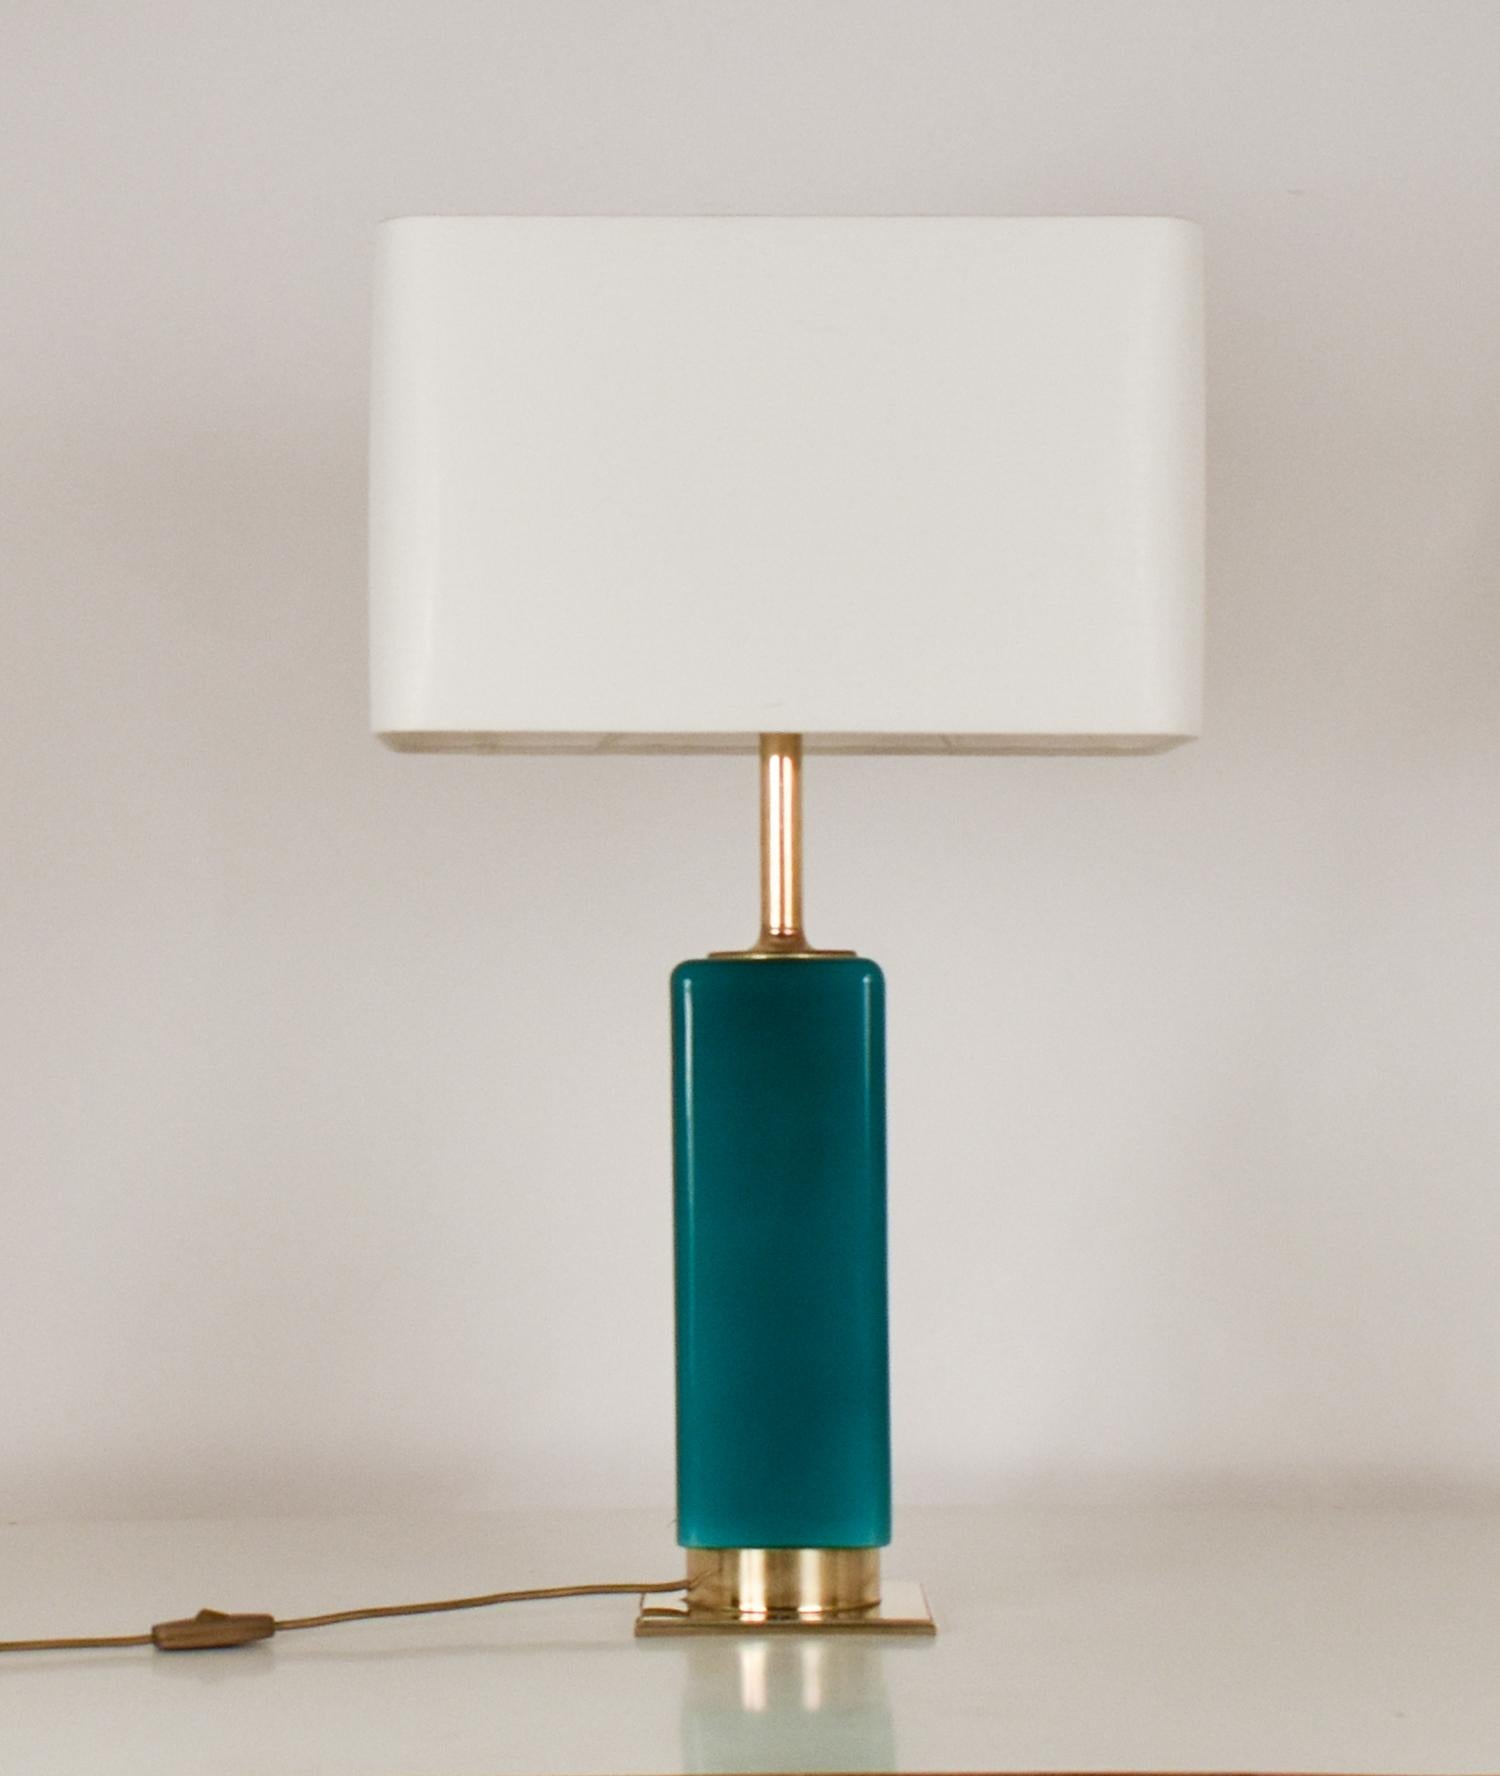 
Green glass and brass table lamp, 1970s, Metalarte, Spain
It has two bulbs: An interior bulb inside the glass and the other exterior.
You can turn on both bulbs or just the one on the screen or just the one inside the glass.
New rectangular